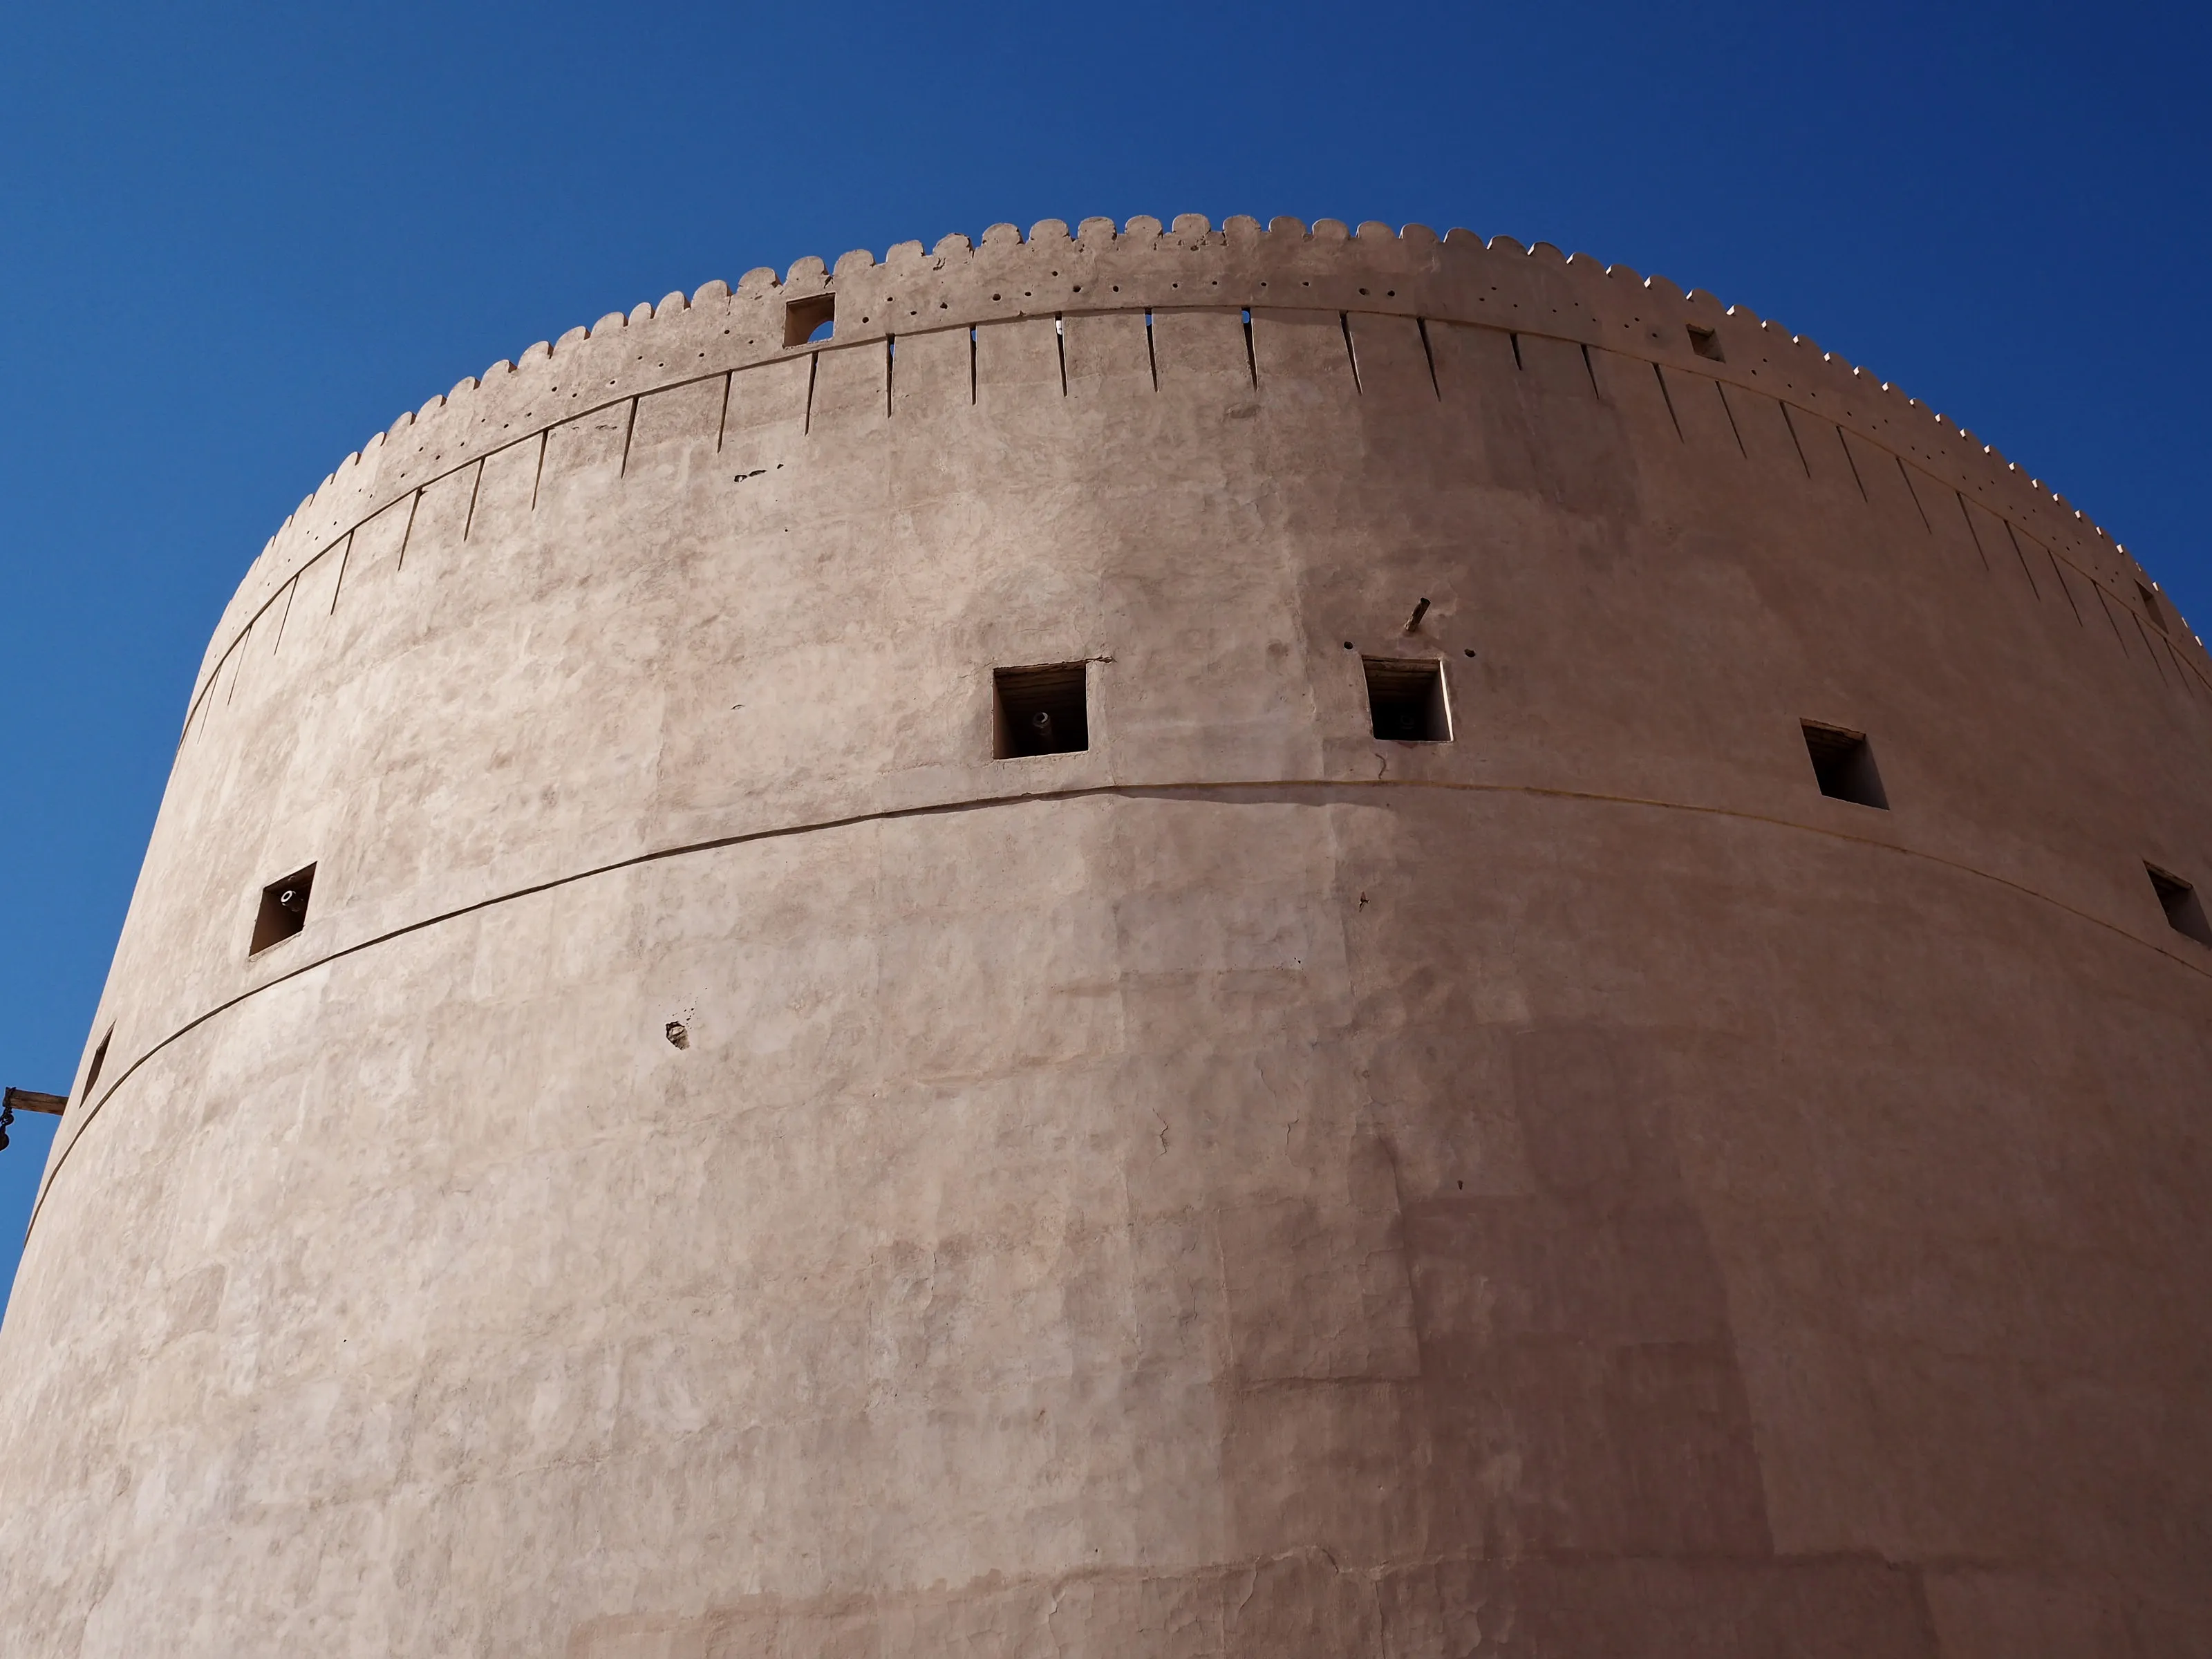 The old trading hub of Nizwa has a beautiful old town and fort.